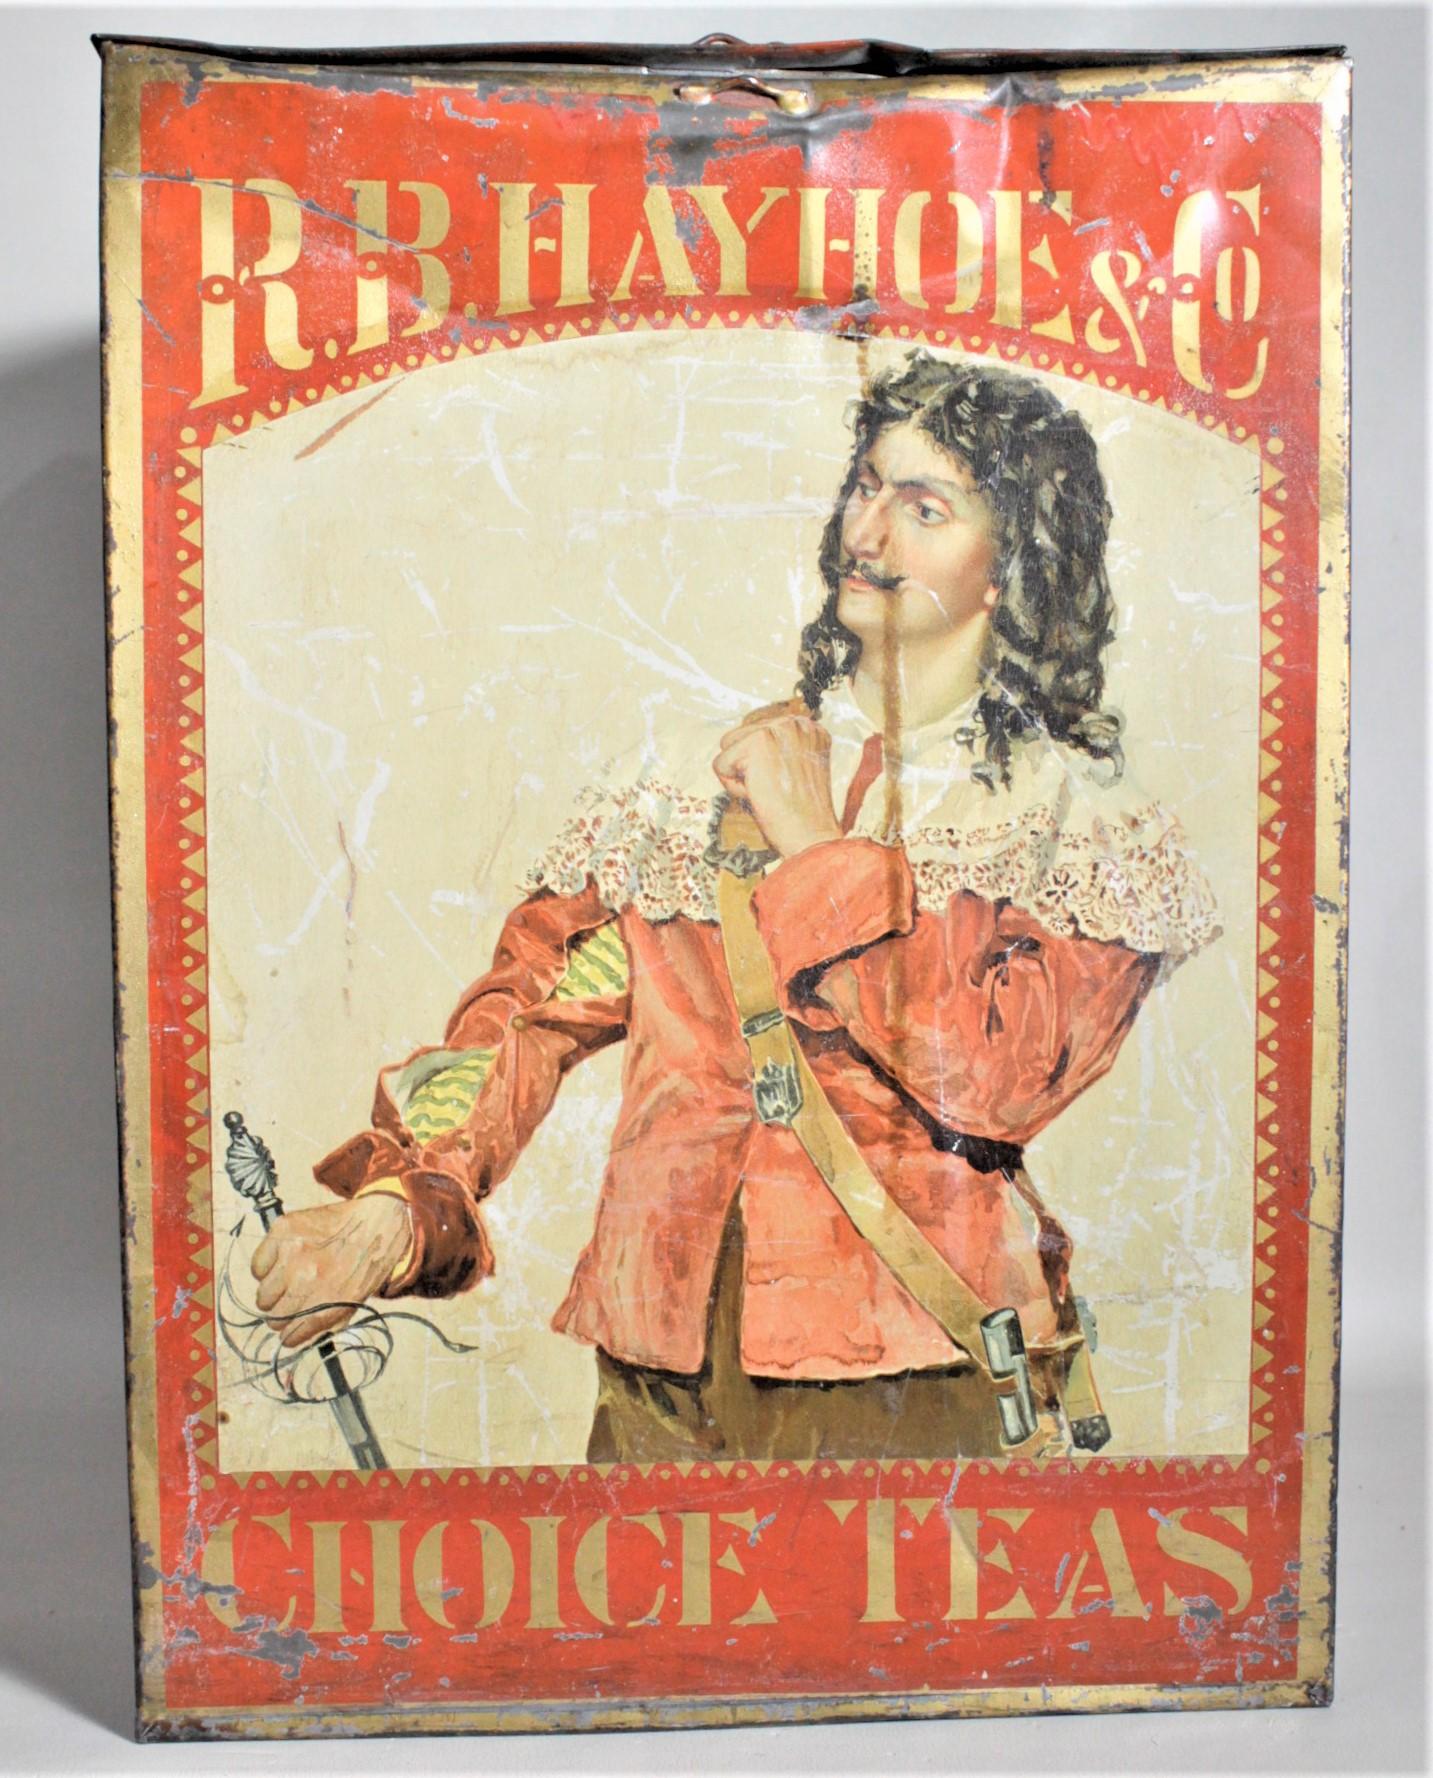 This antique general store advertising store display tin for the R.B. Hay Hoe & Co. tea is presumed to have been made in Canada in approximately 1880 in the period Victorian style. The tin advertises Tea which the Hay Hoe company imported, and the